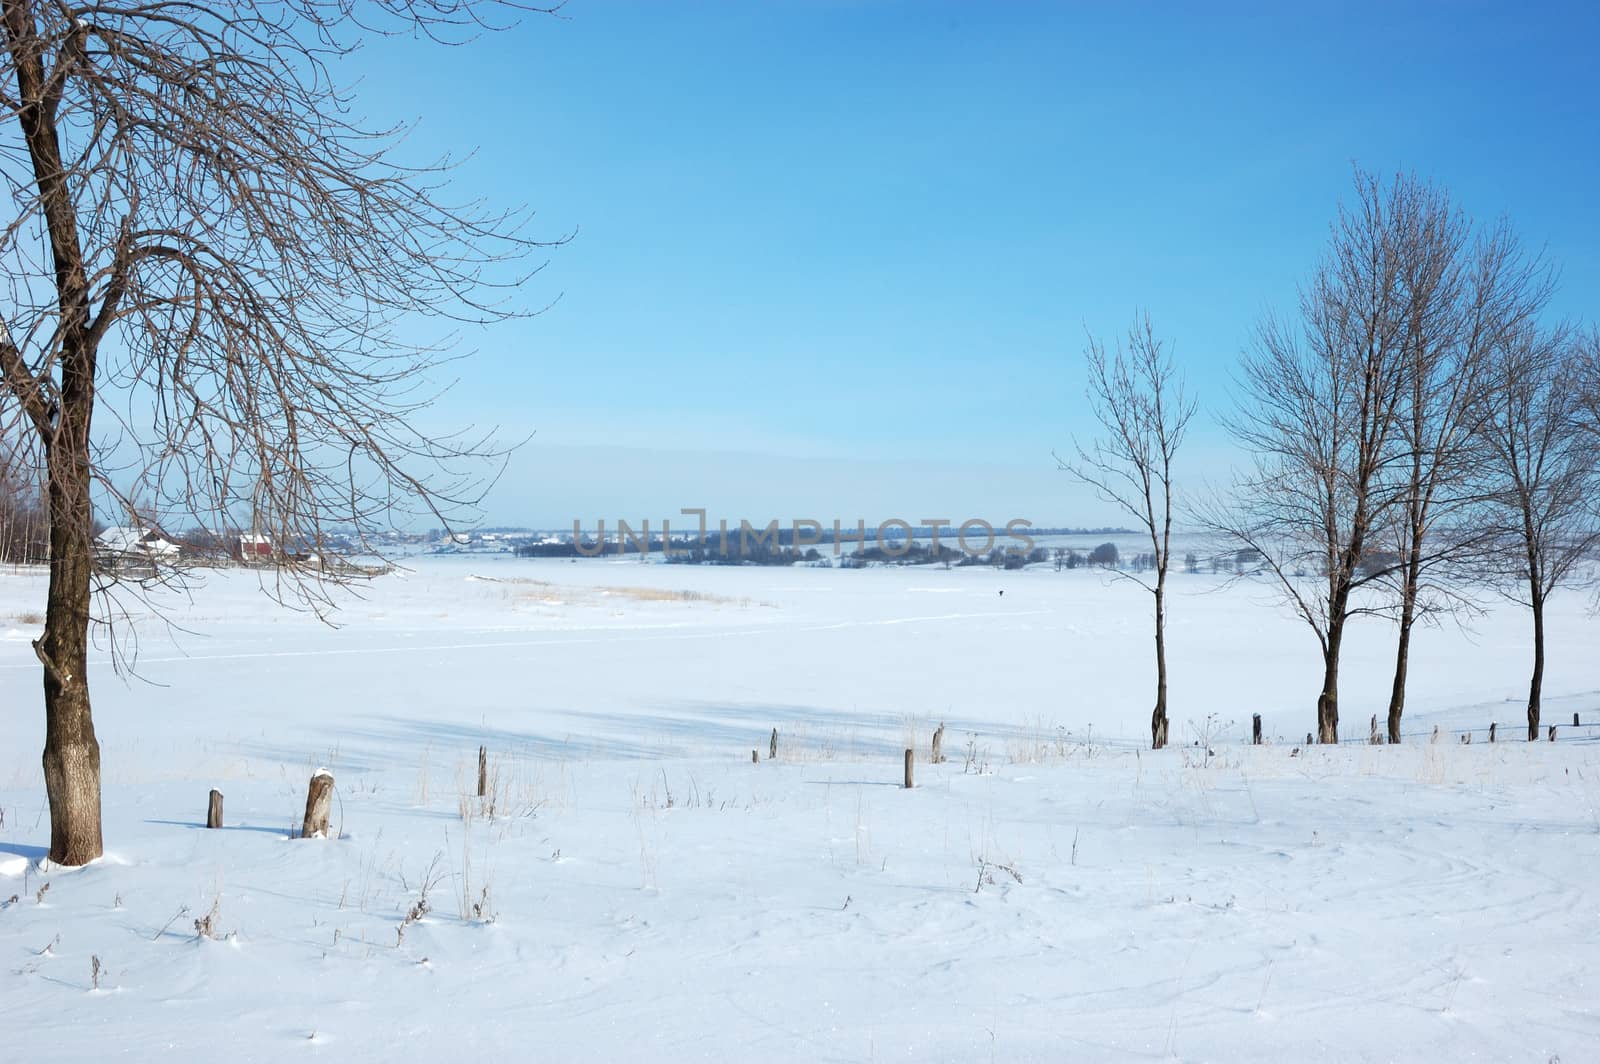 View of frozen river with trees on riverbank, Russia 